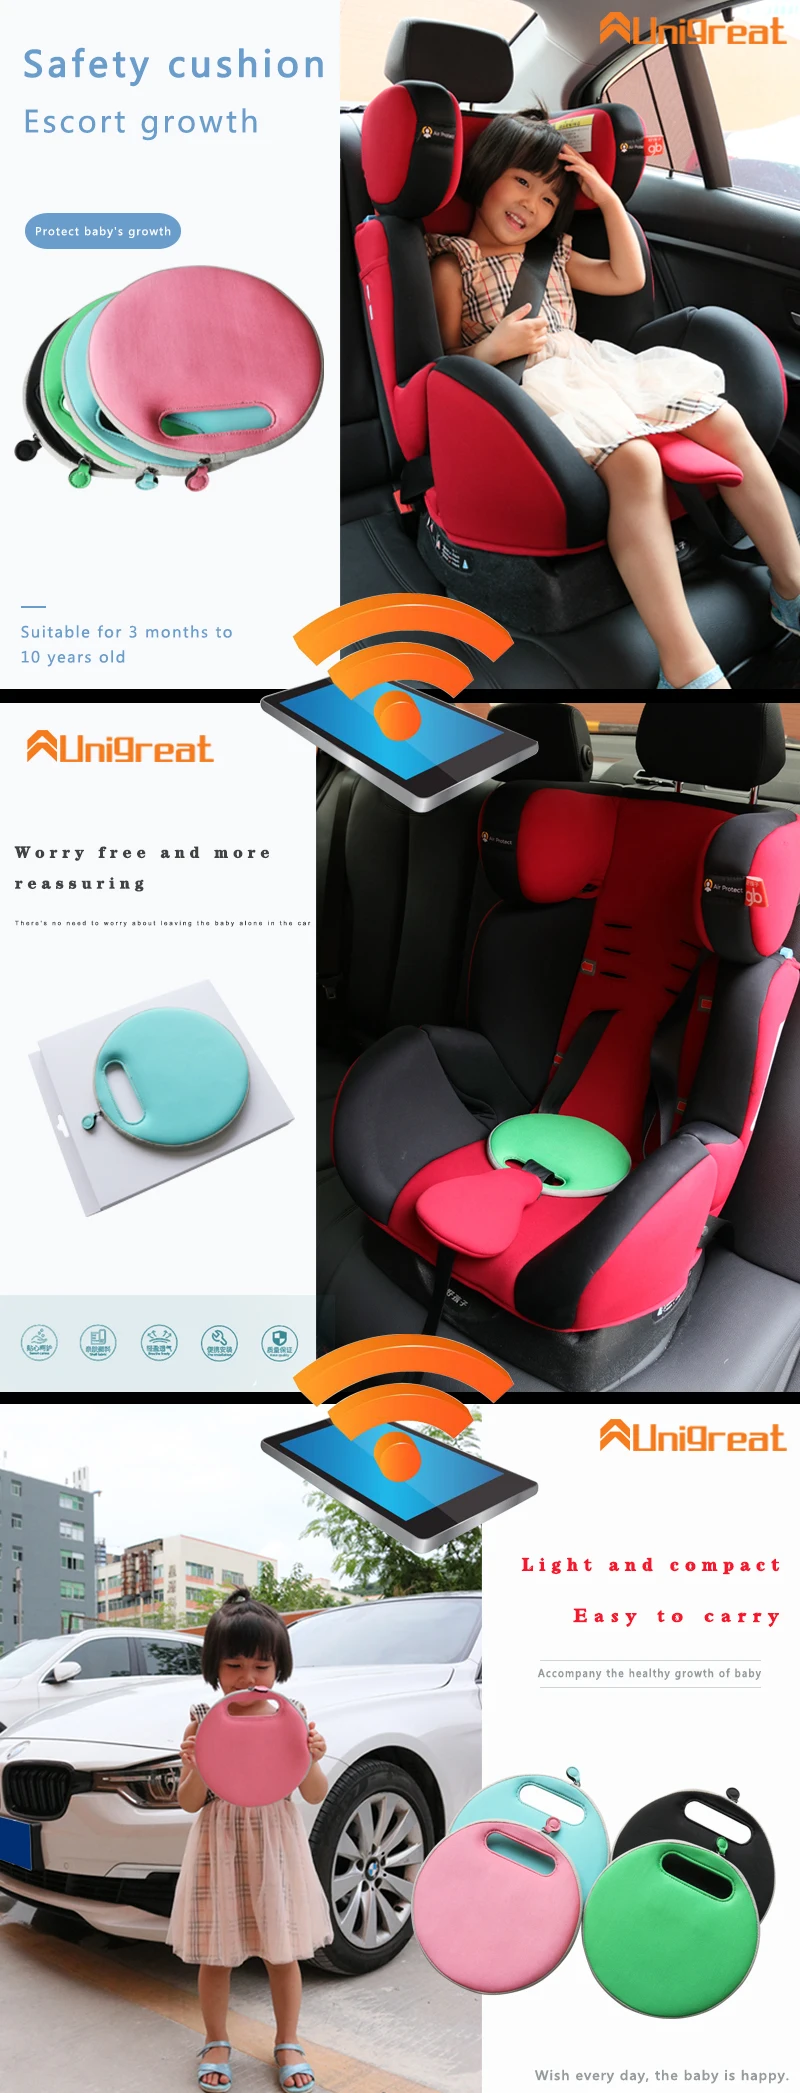 2020 New Design Car Seat Pad Pressure Sensor Baby Seat Alarm Cushion Remind Parents For Safety Compliable with EU Regulations